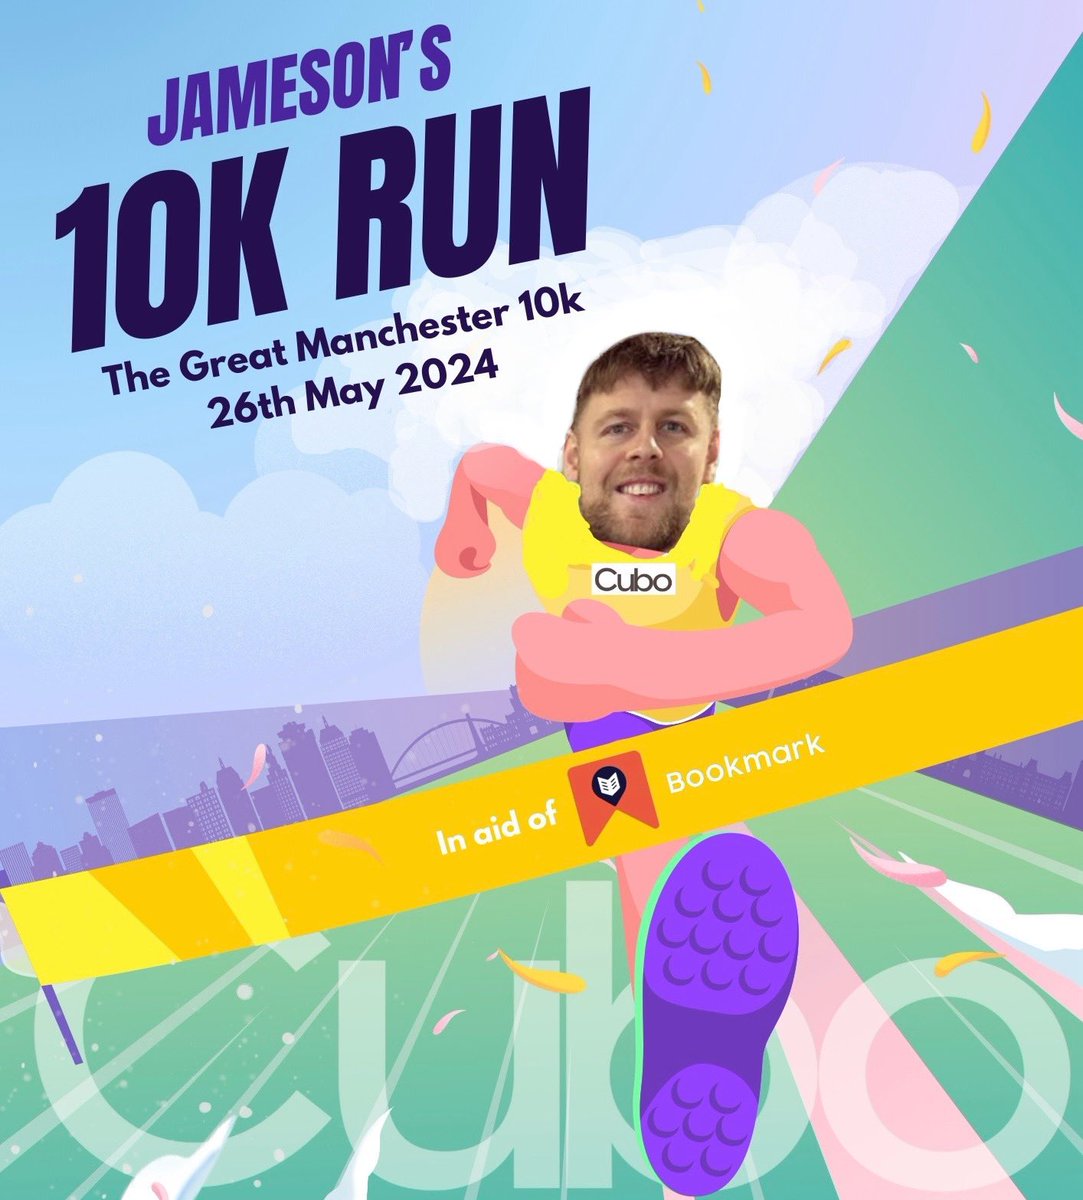 Our very own Cubo Manchester Centre Manager Jameson will be running the Great Manchester 10k next month to raise funds for our chosen charity @BookmarkCharity If you would like to donate please do here: justgiving.com/page/cubo-1707… Go Jameson! 🙌🏽🏃🏅